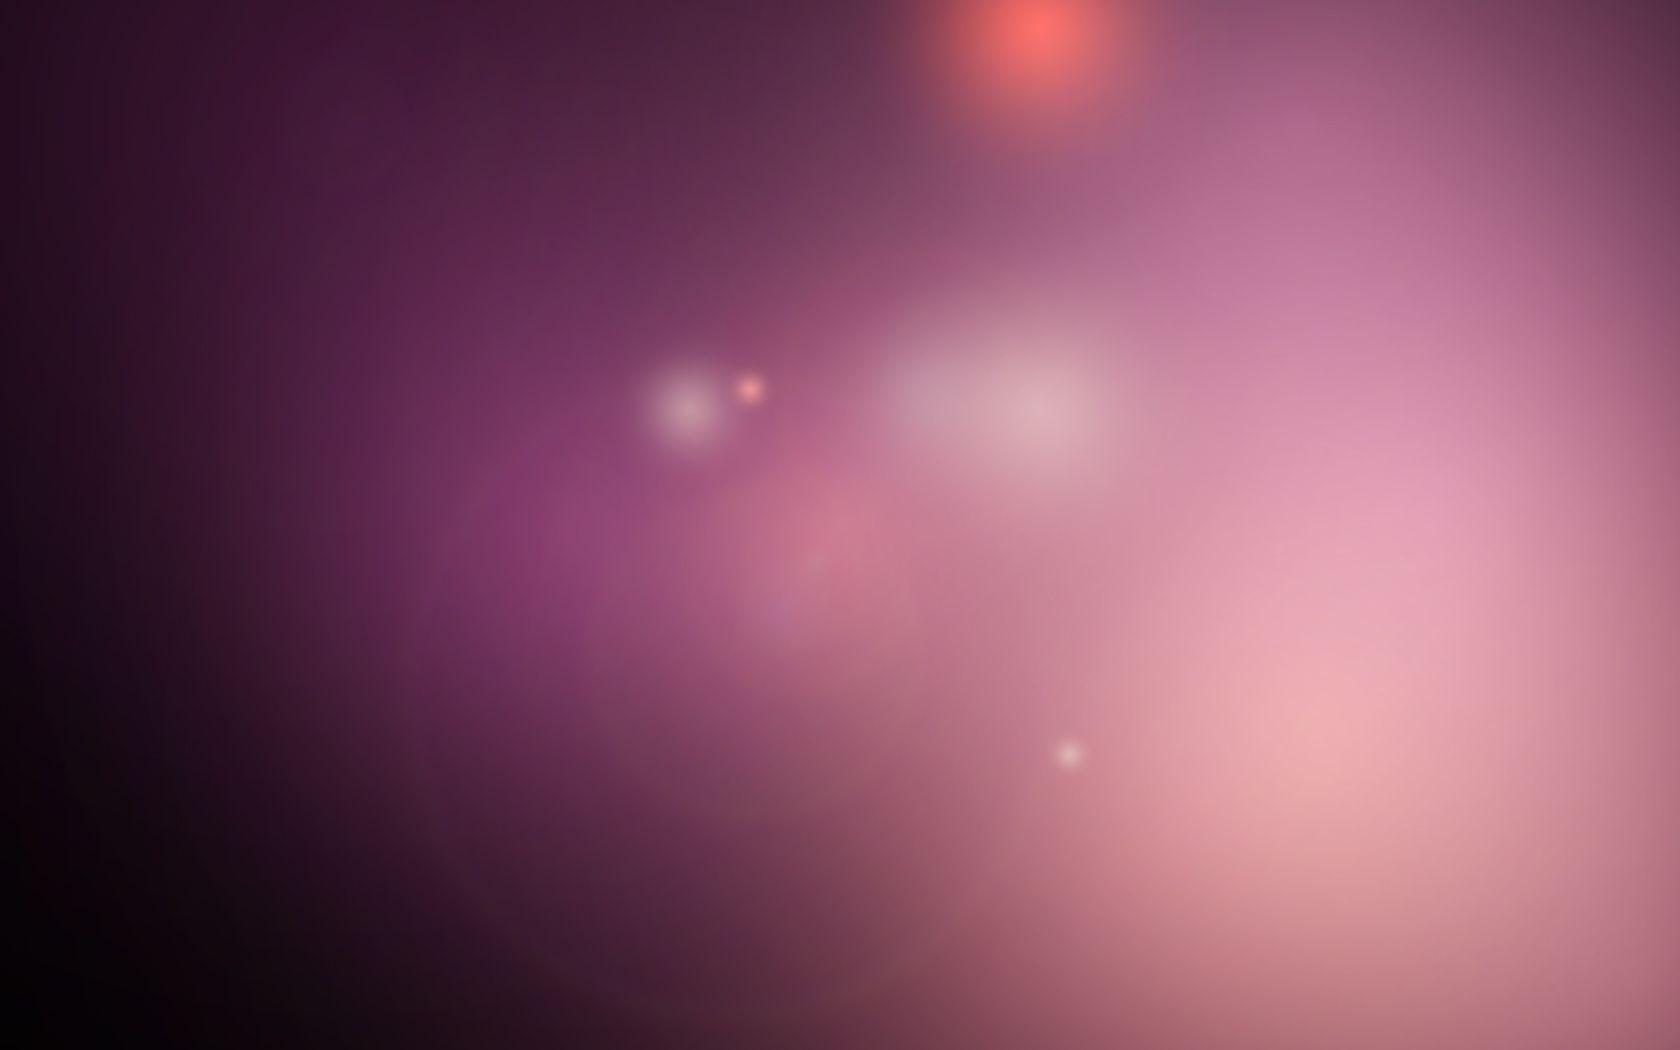 New wallpaper for Ubuntu 10.04 (Lucid) and Download link included